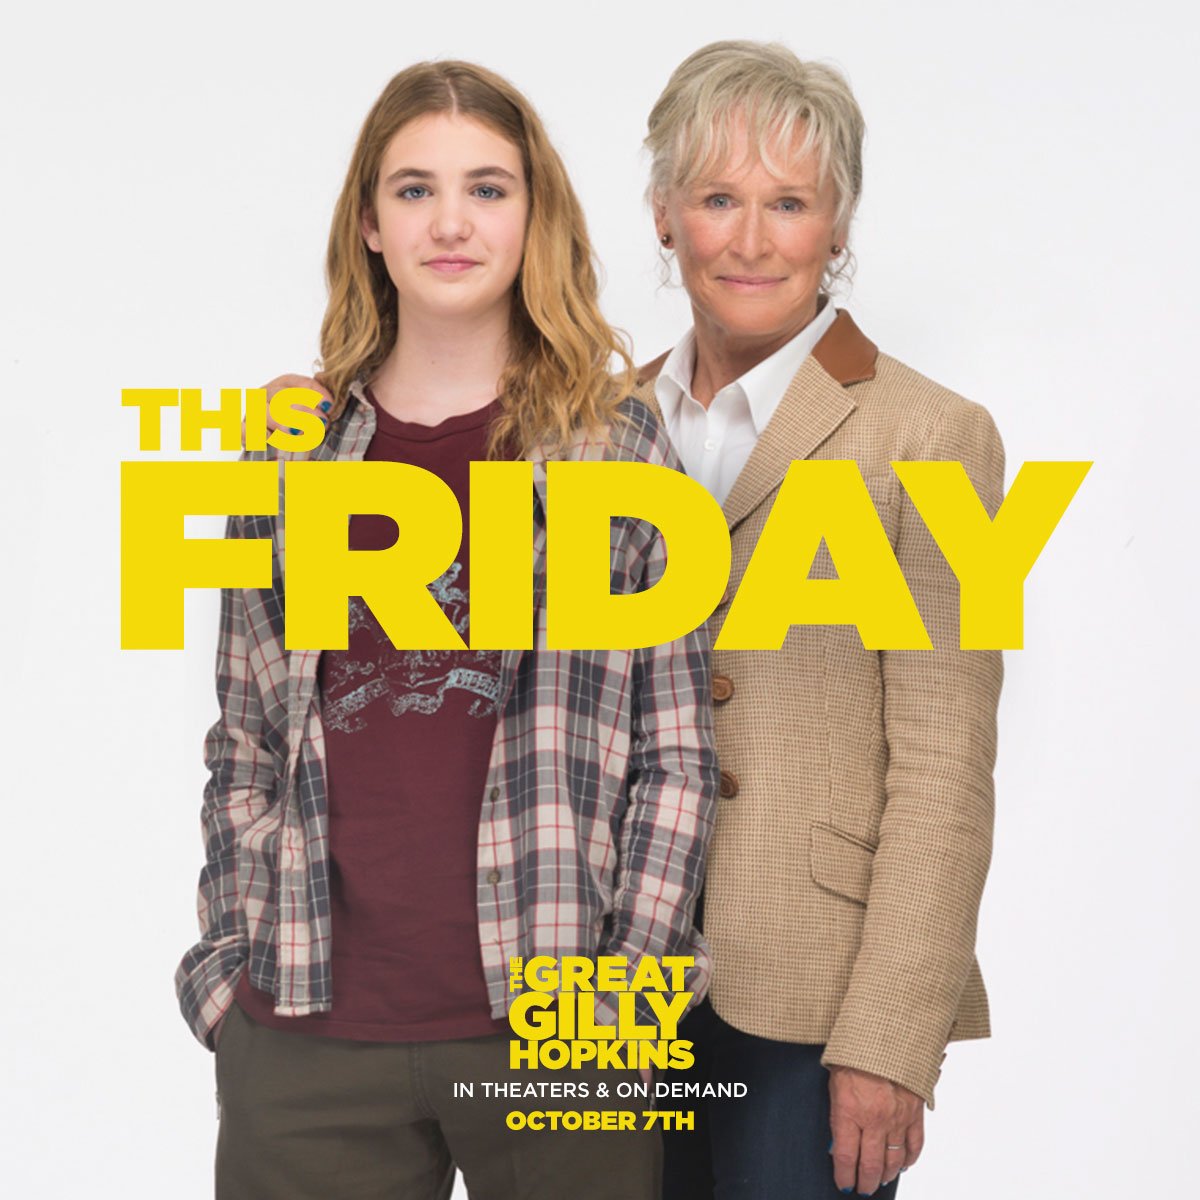 Home is where your heart is. Watch @TheGlennClose and @Sophie_Nelisse star in #TheGreatGillyHopkins, in theaters and on demand this Friday!